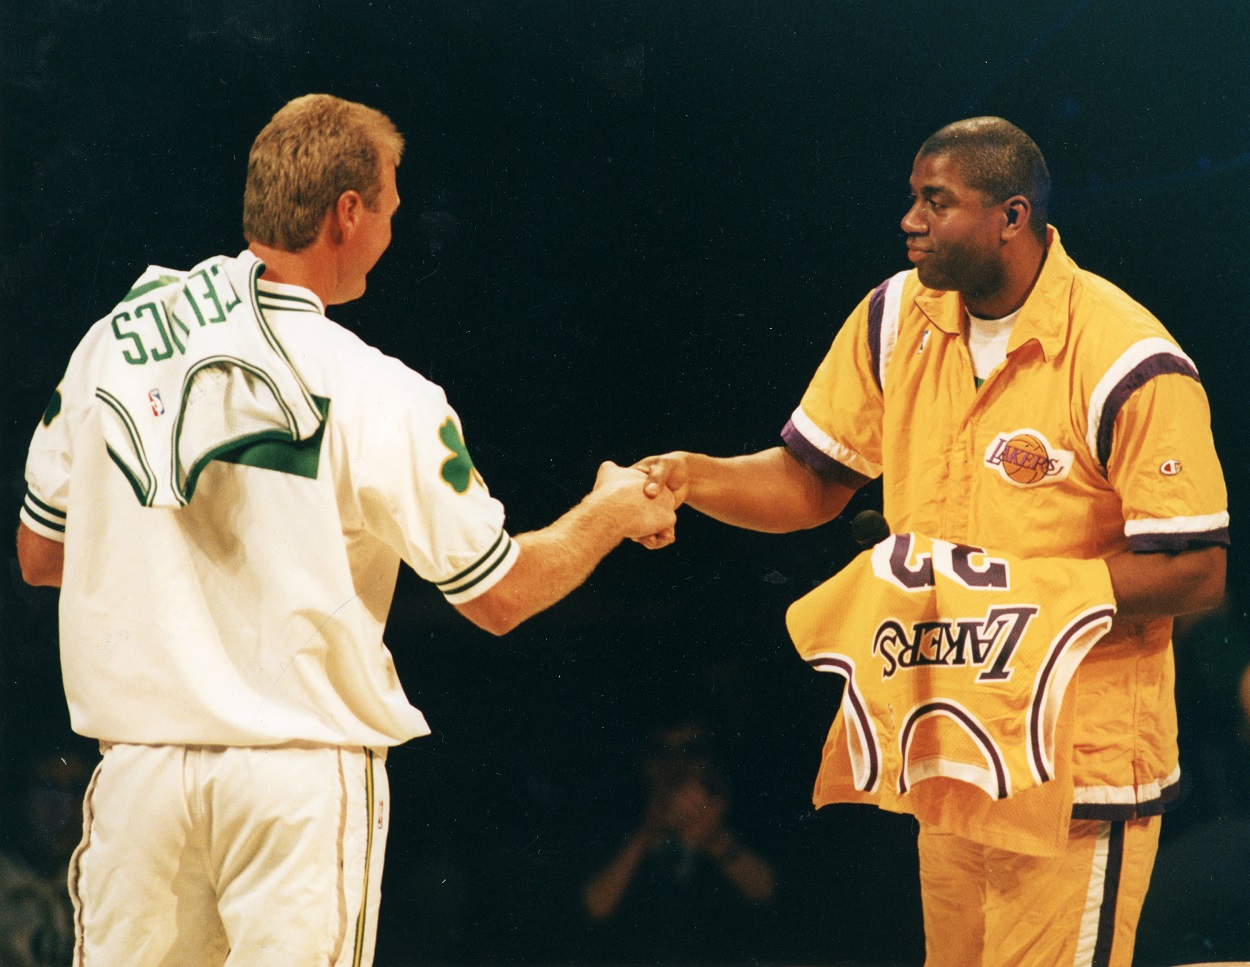 Broadway: In Magic/Bird, Magic Johnson and Larry Bird's Rivalry on Stage